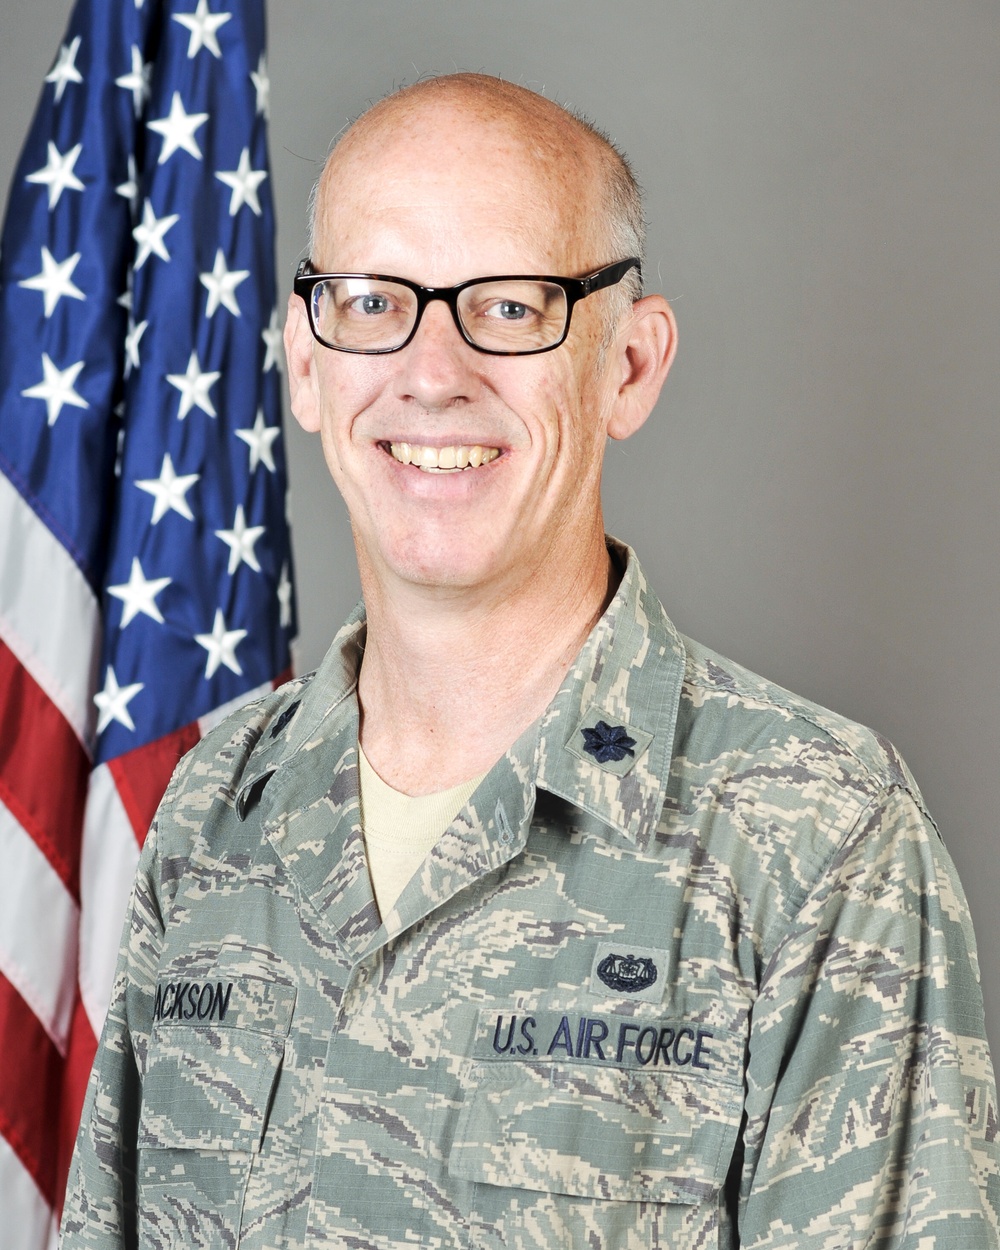 Lt. Col. Jackson Assigned as California Air National Guard Defense Counsel